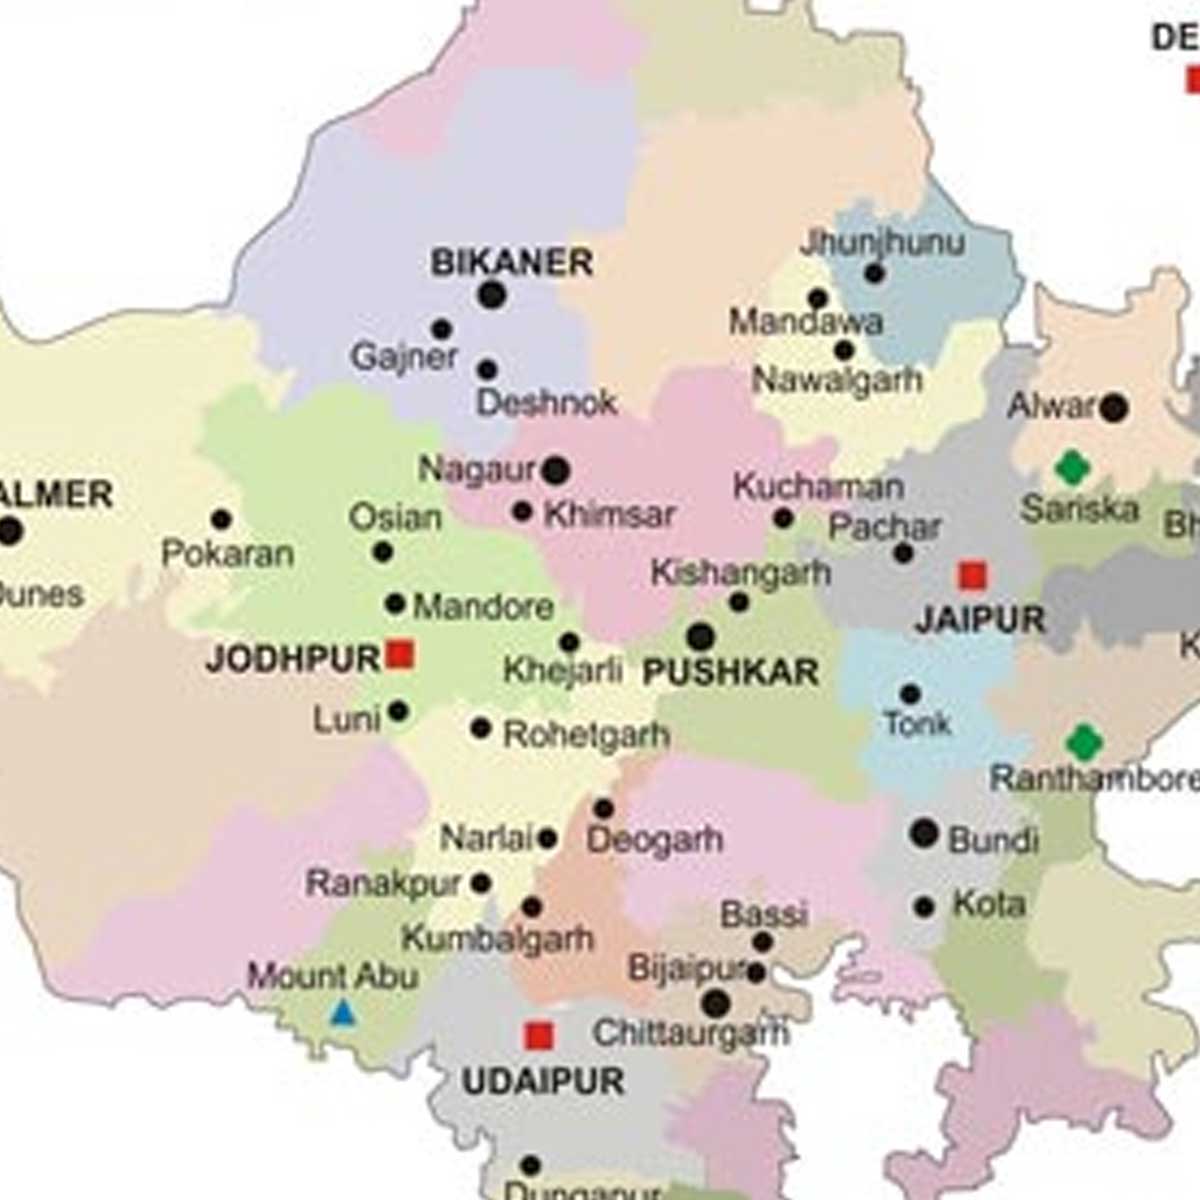 rajasthan tour map with distance